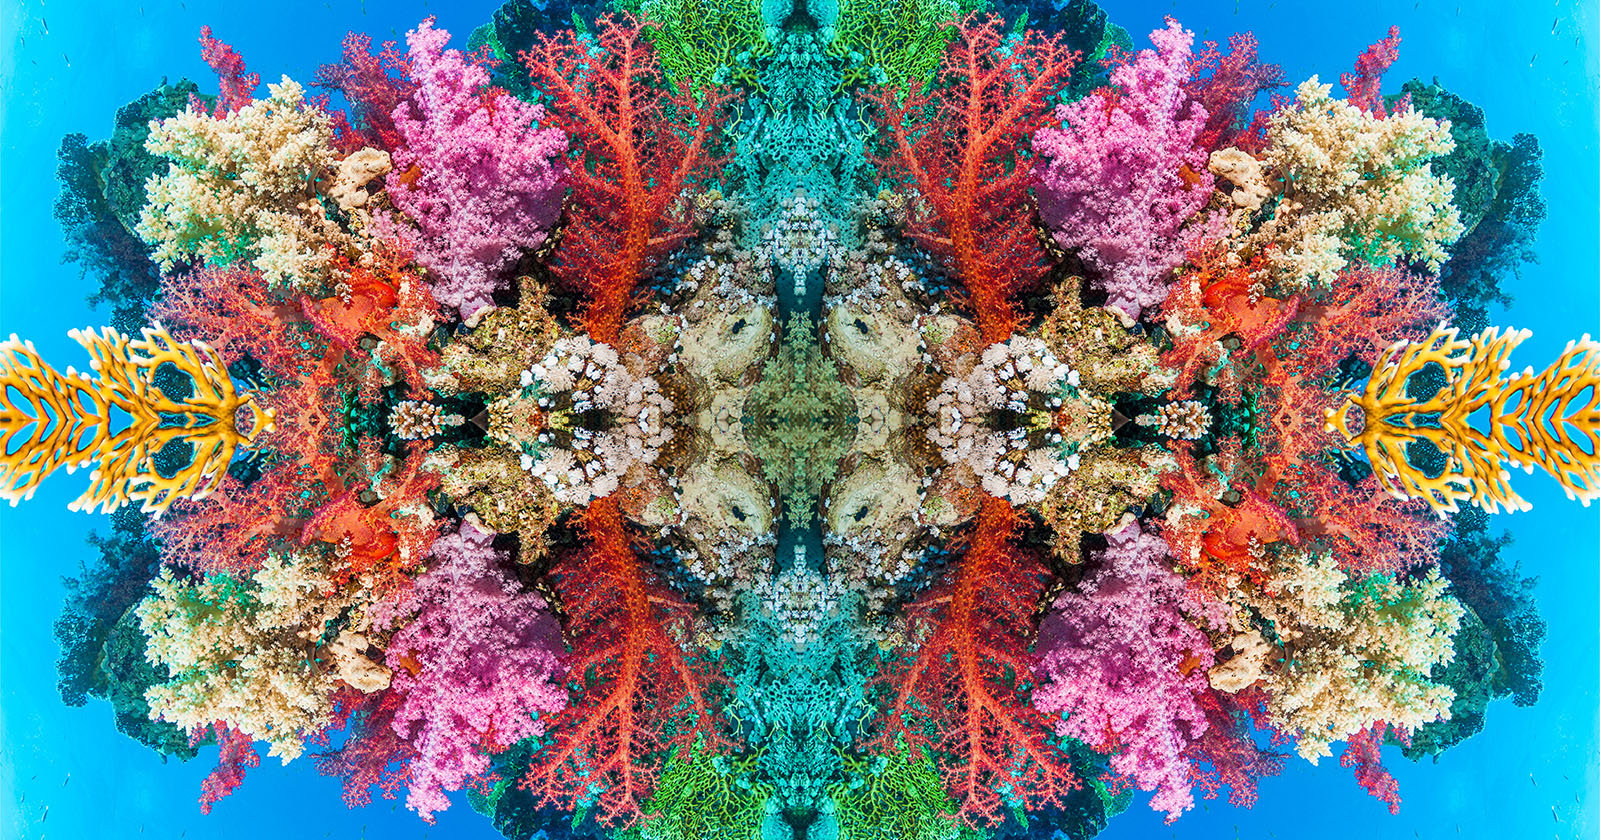 Vibrant coral reef scene with a symmetrical arrangement featuring various types and colors of coral, including pink, red, green, and yellow, surrounded by clear blue water. The mirrored effect creates a visually stunning, kaleidoscopic underwater landscape.